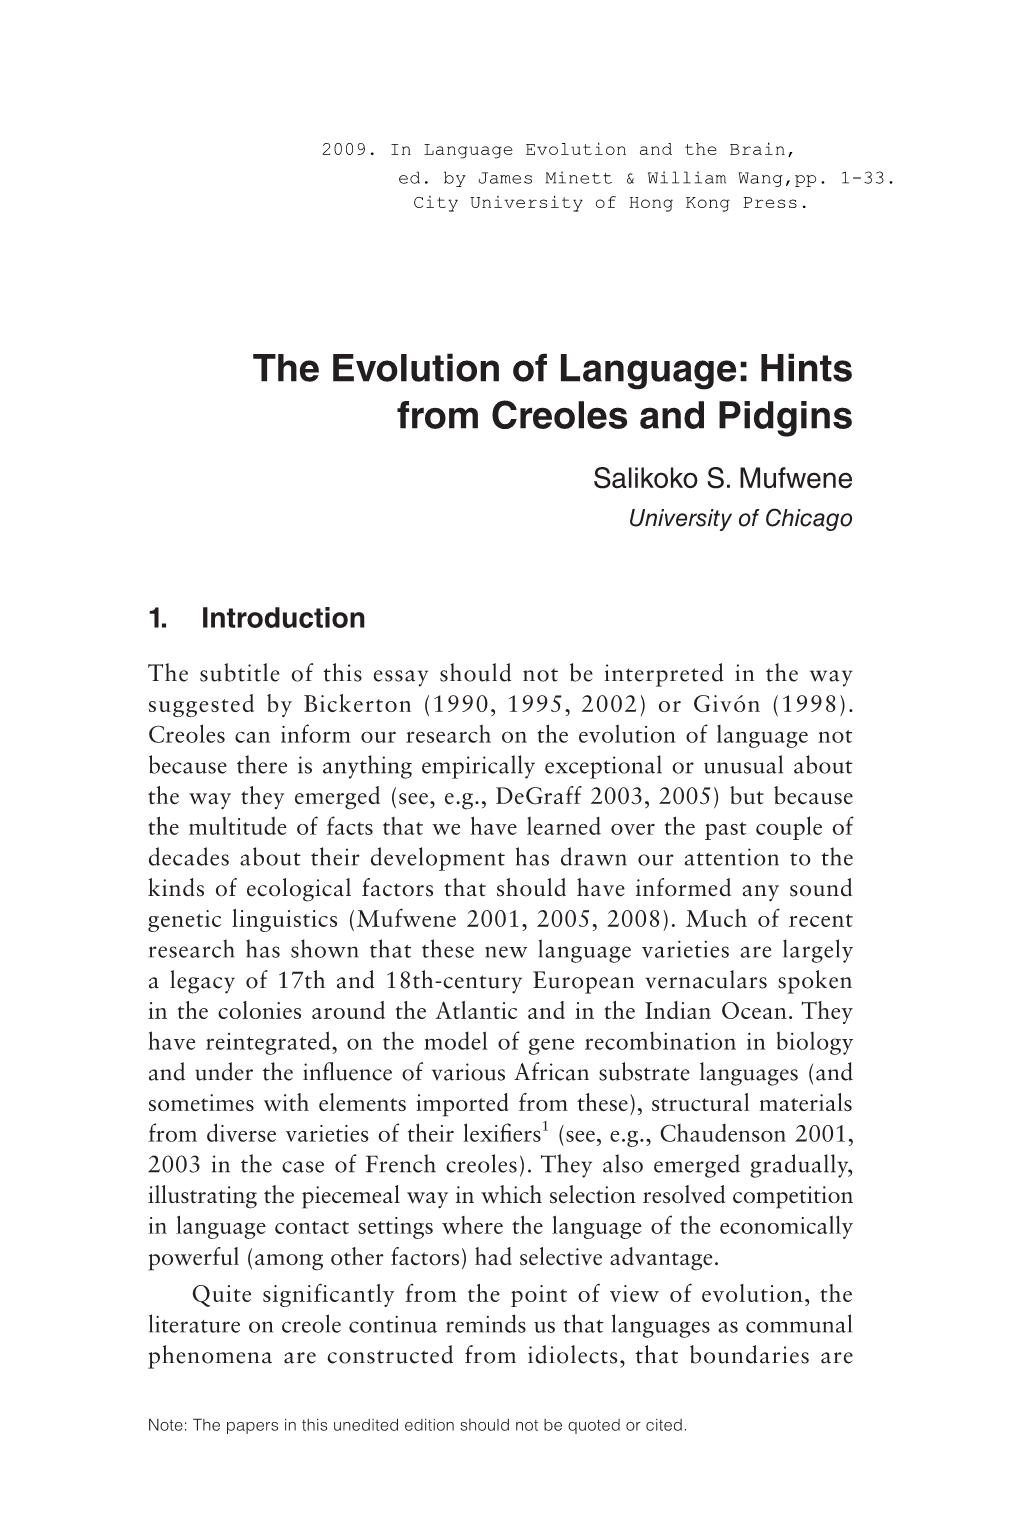 The Evolution of Language: Hints from Creoles and Pidgins